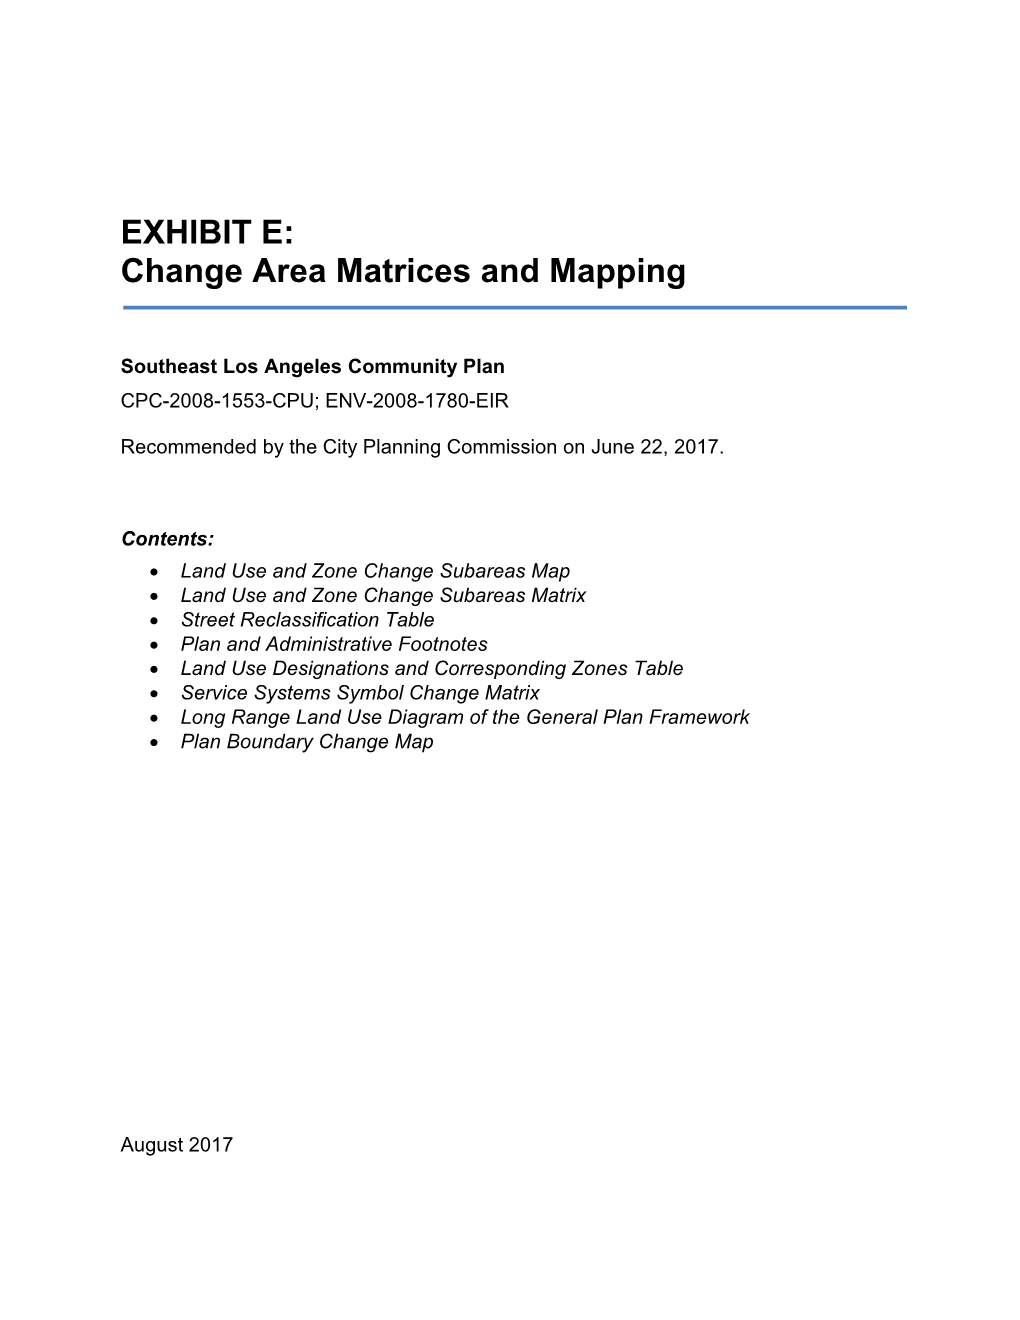 EXHIBIT E: Change Area Matrices and Mapping